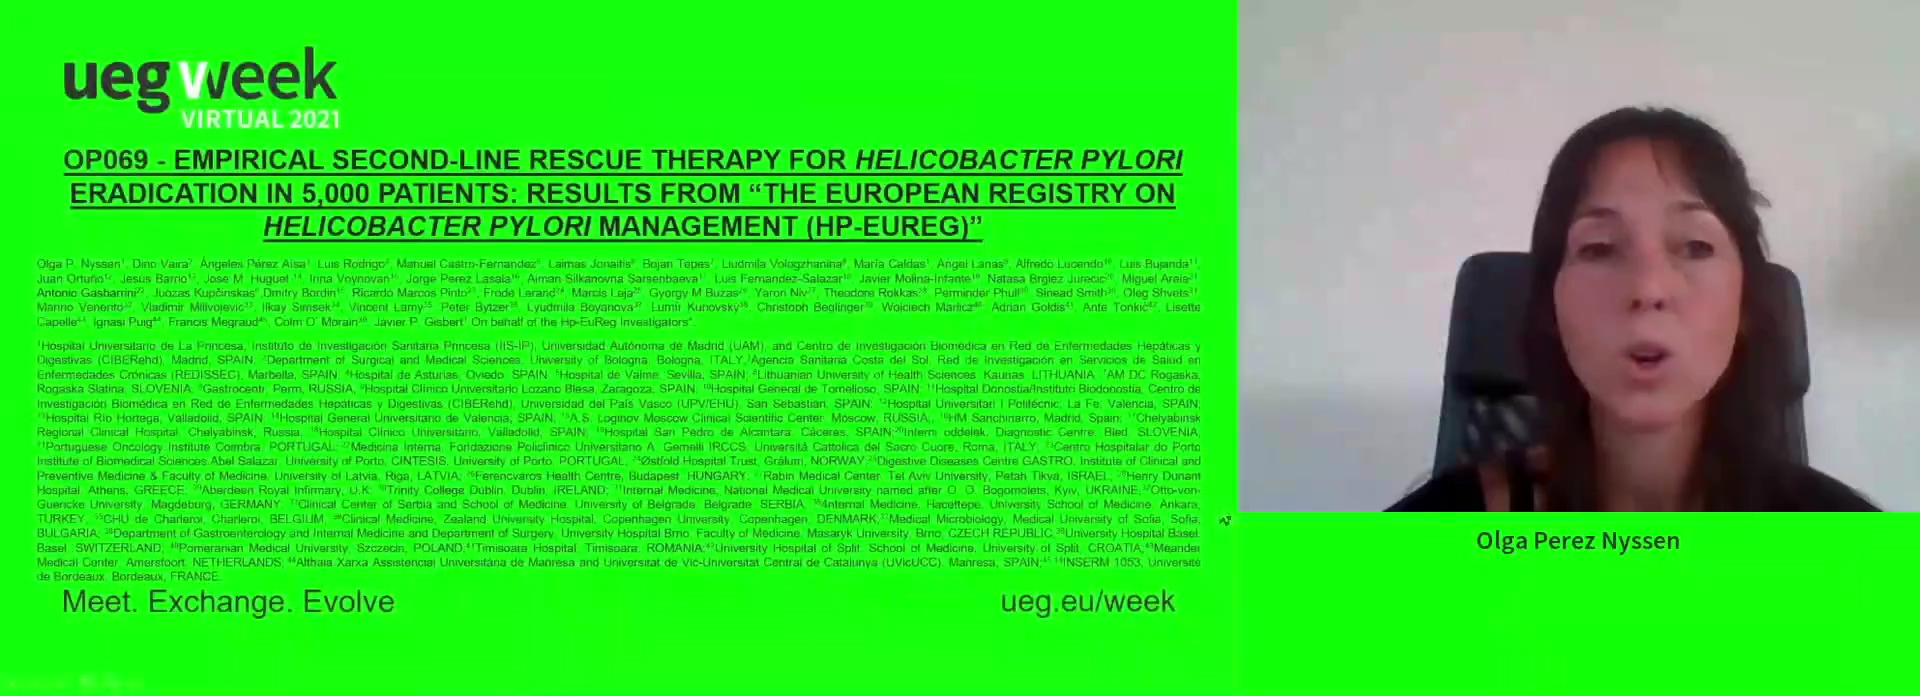 EMPIRICAL SECOND-LINE TREATMENTS IN EUROPE: RESULTS FROM THE EUROPEAN REGISTRY ON H. PYLORI MANAGEMENT (HP-EUREG)